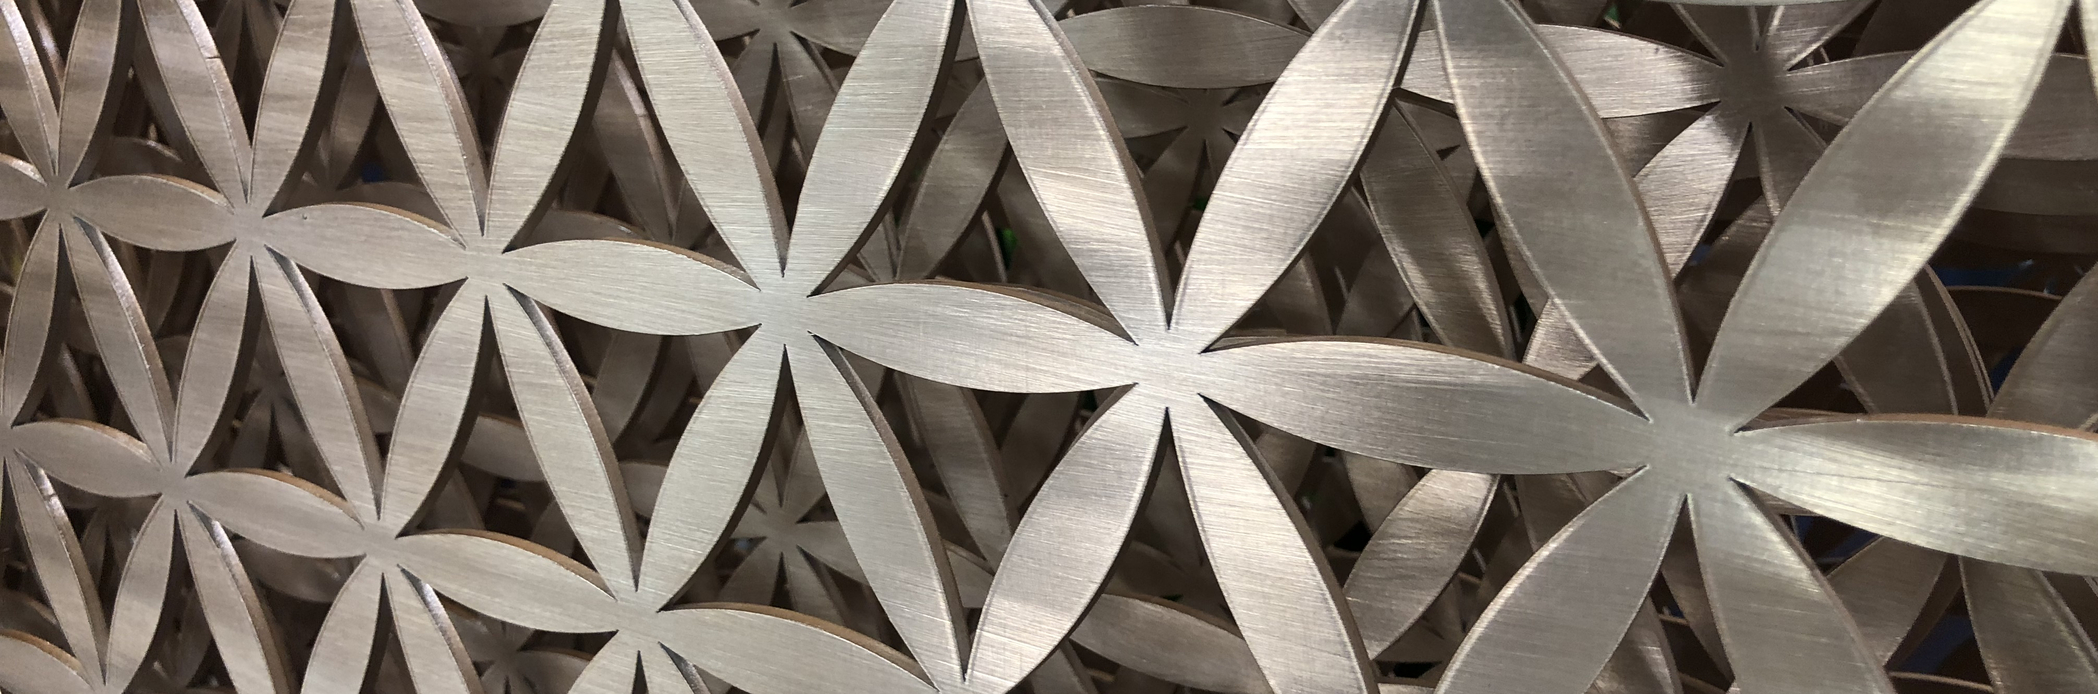 Discover our selection of sheet metal decorative for a unique wall art ...